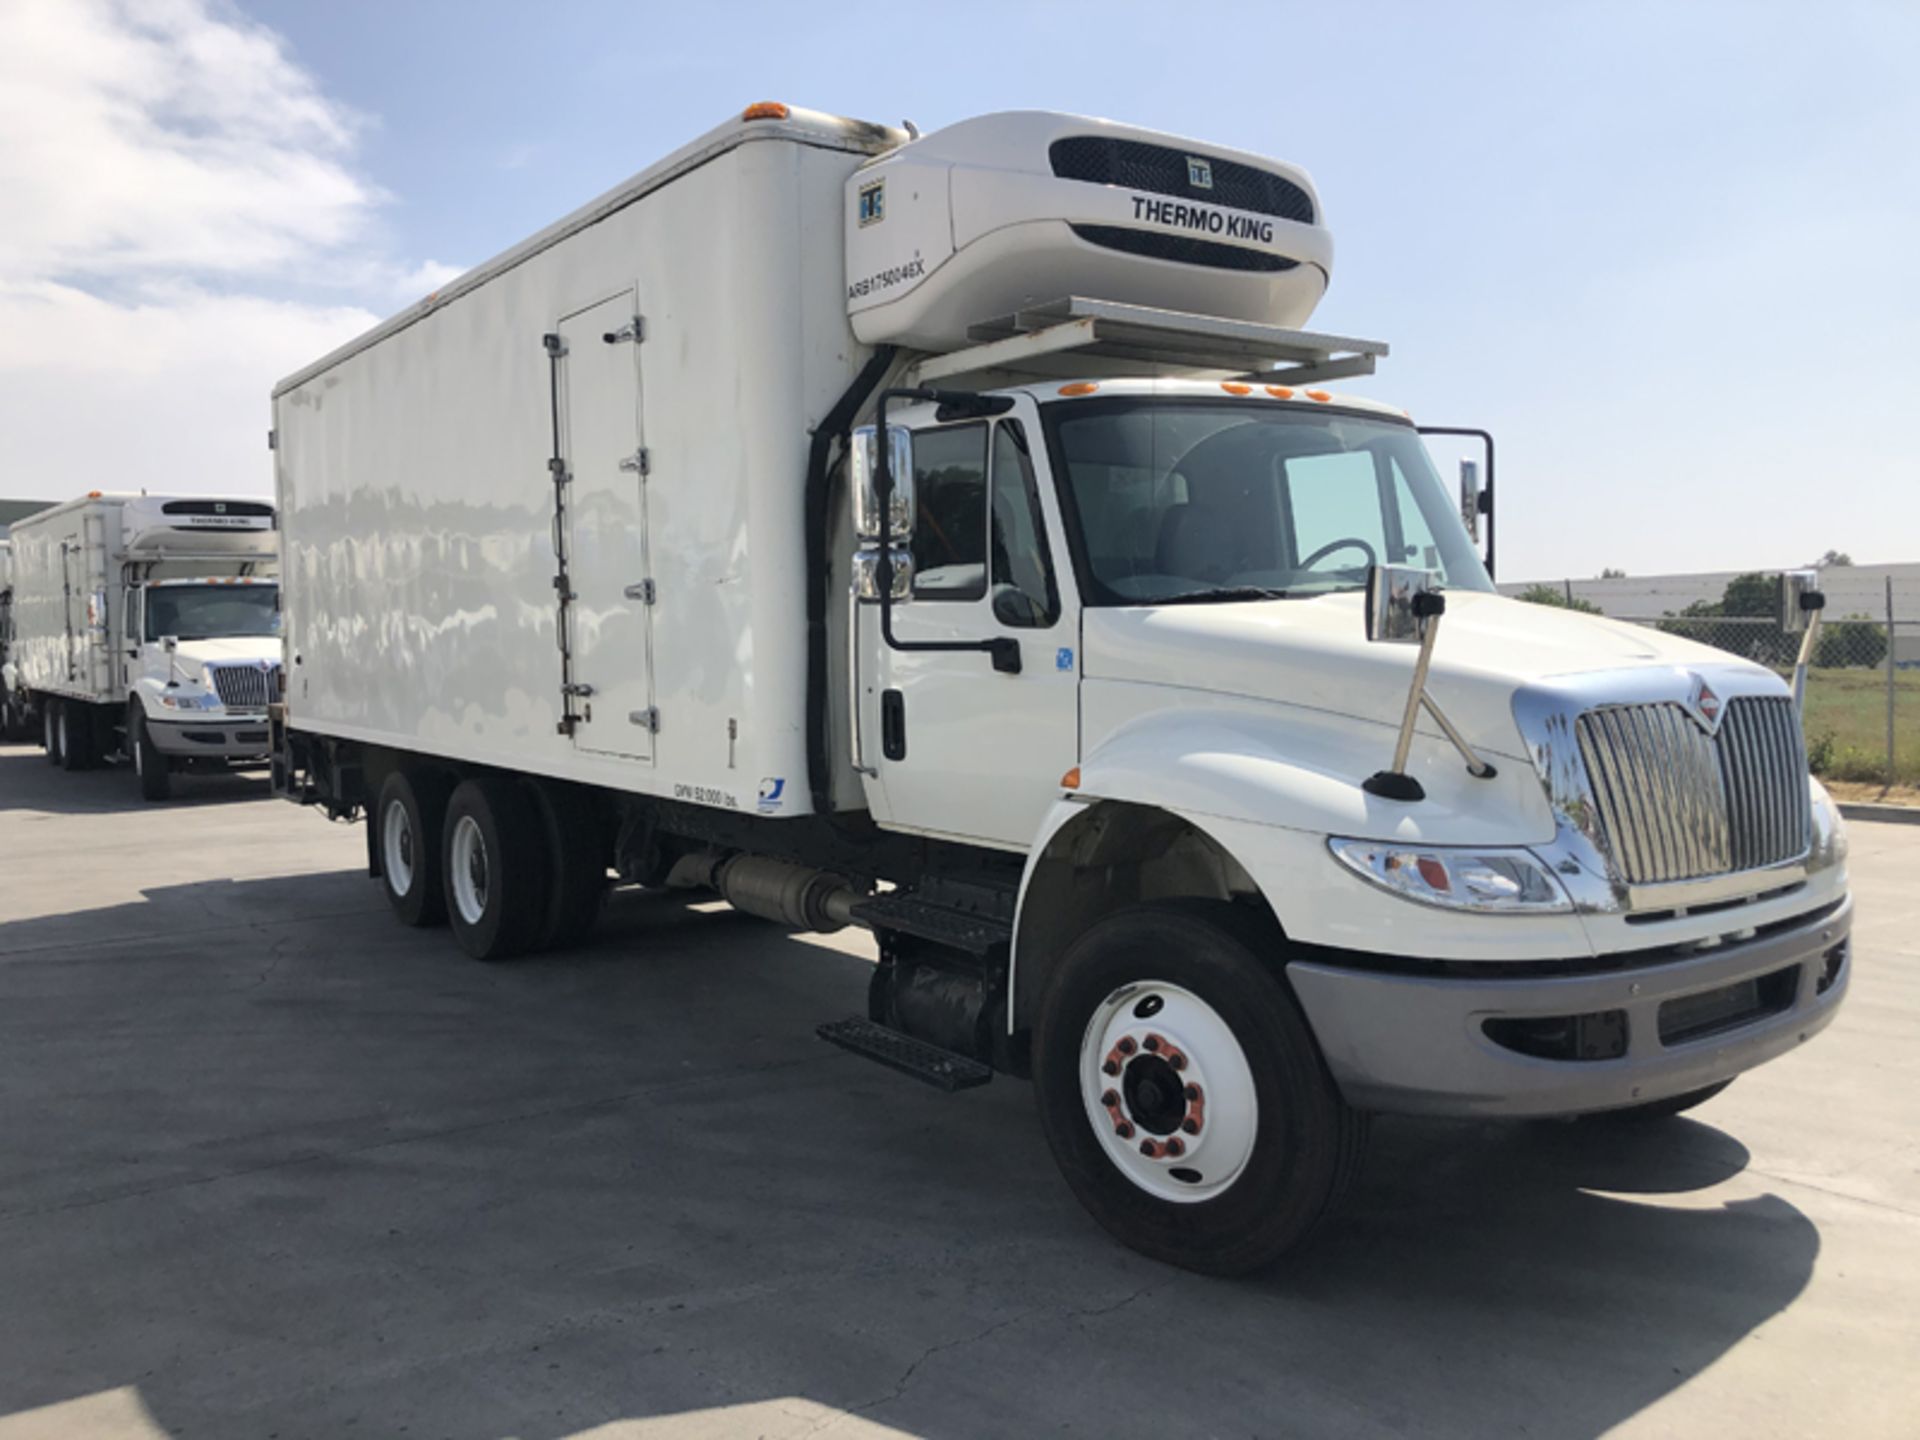 2018 INTERNATIONAL 4400 SBA 6X4 REFRIGERATED BOX TRUCK VIN#: 1HTMSTAR2JH529630, Approx Miles: 31958, - Image 3 of 10